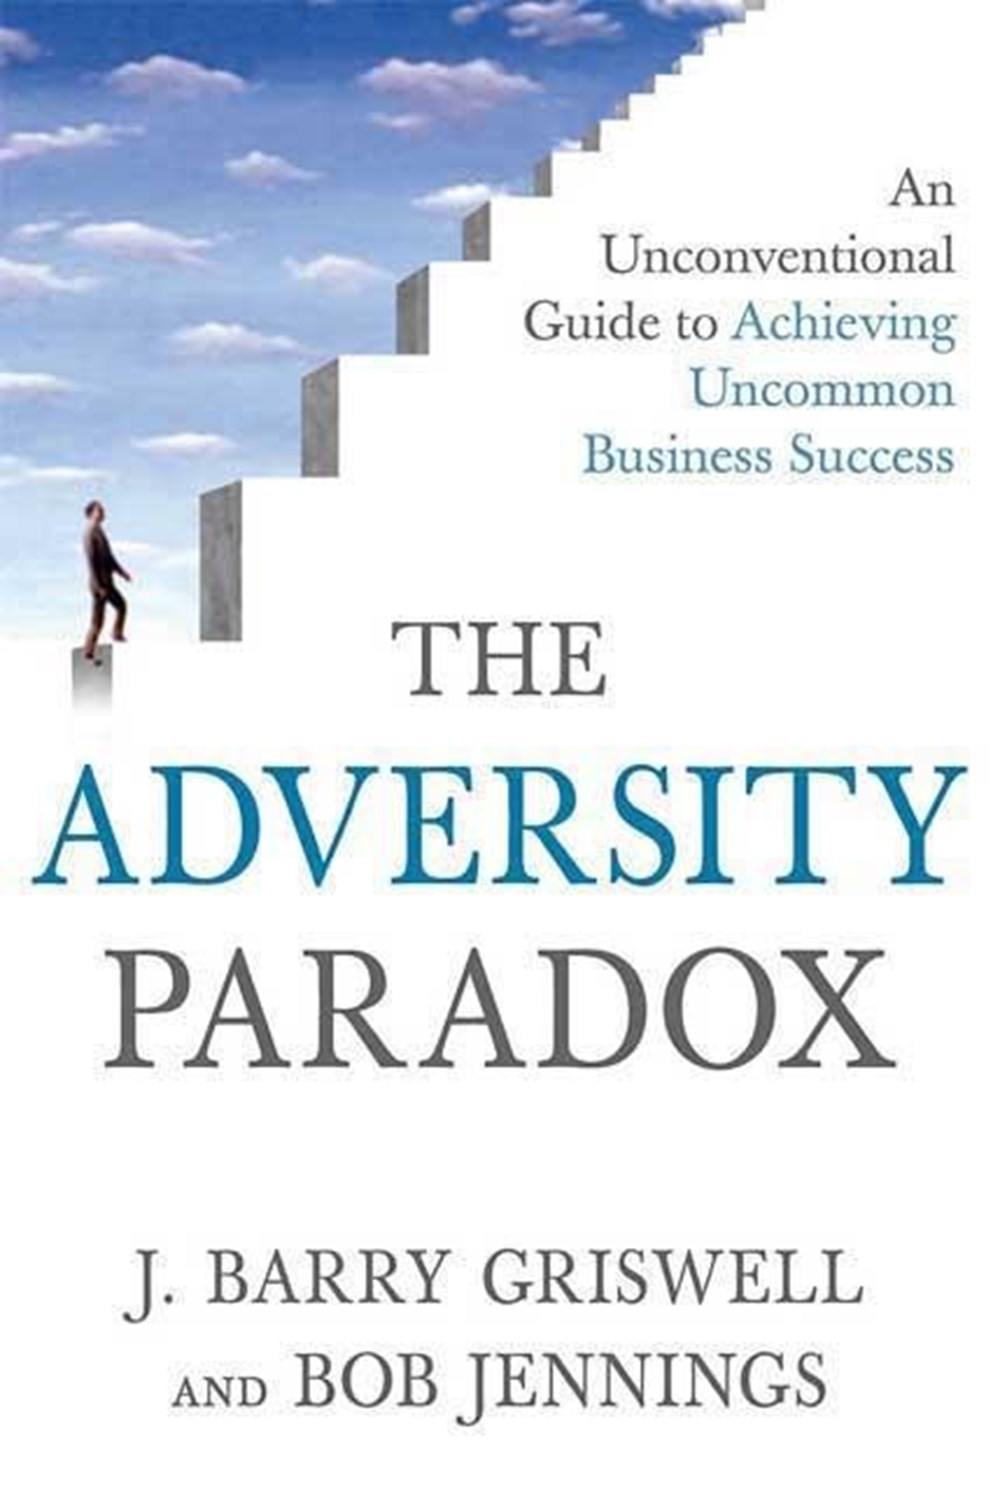 Adversity Paradox: An Unconventional Guide to Achieving Uncommon Business Success